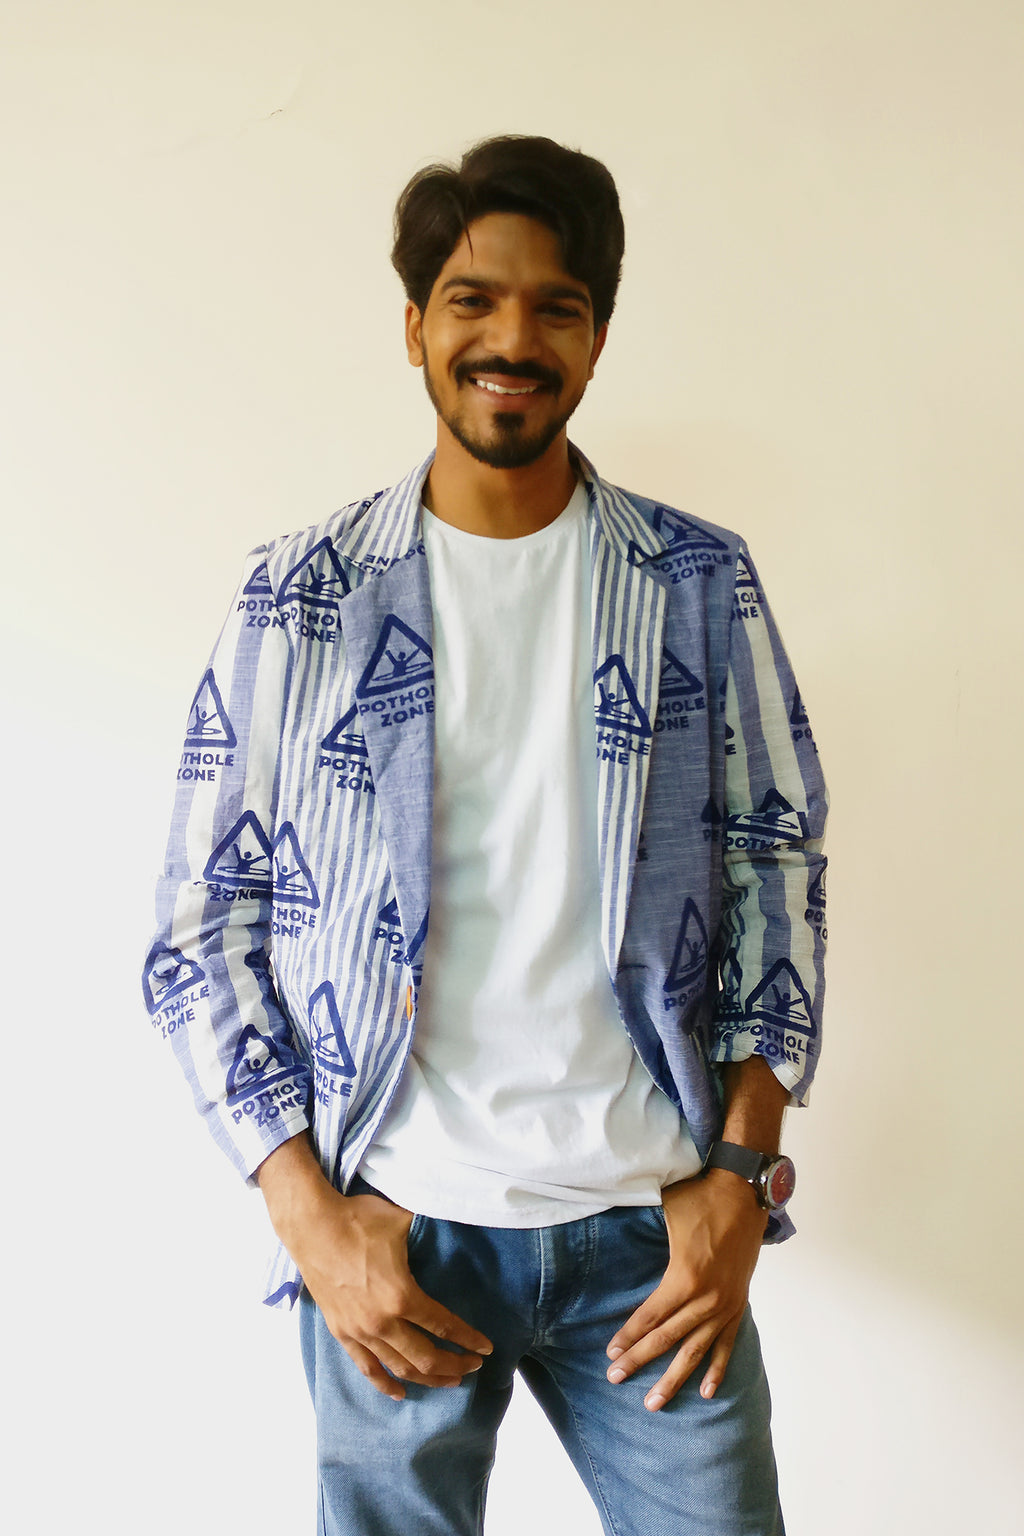 Wear your love for Bombay Meri Jaan. This time we talked about potholes. Men's Blazer Jacket with our original print on very cool handloom stripe cotton fabric. Shop online and survive the crazy Mumbai monsoon!